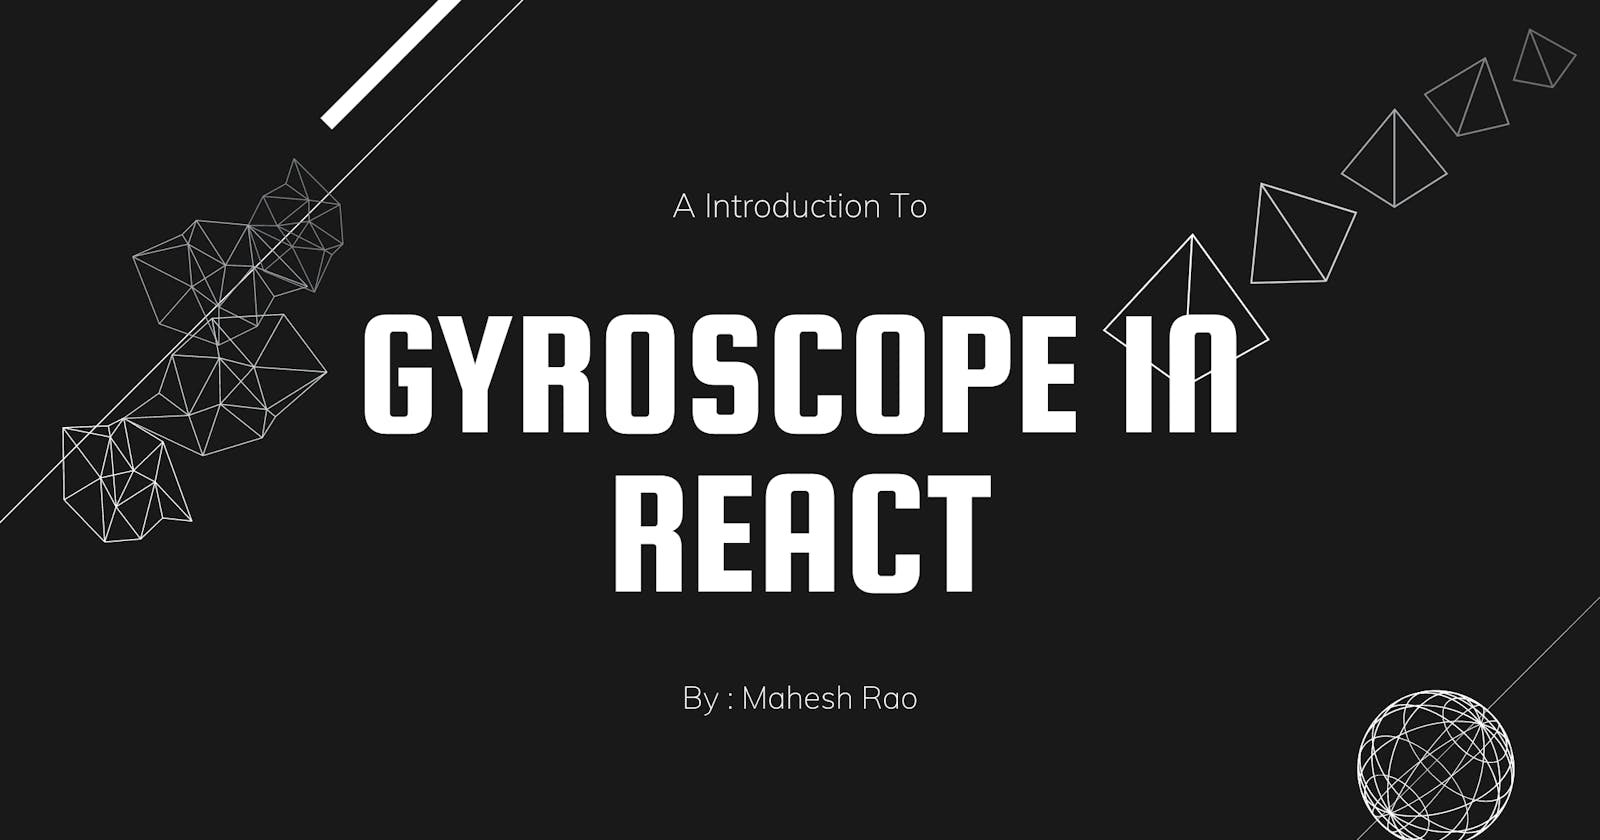 A Introduction to Gyroscope in React